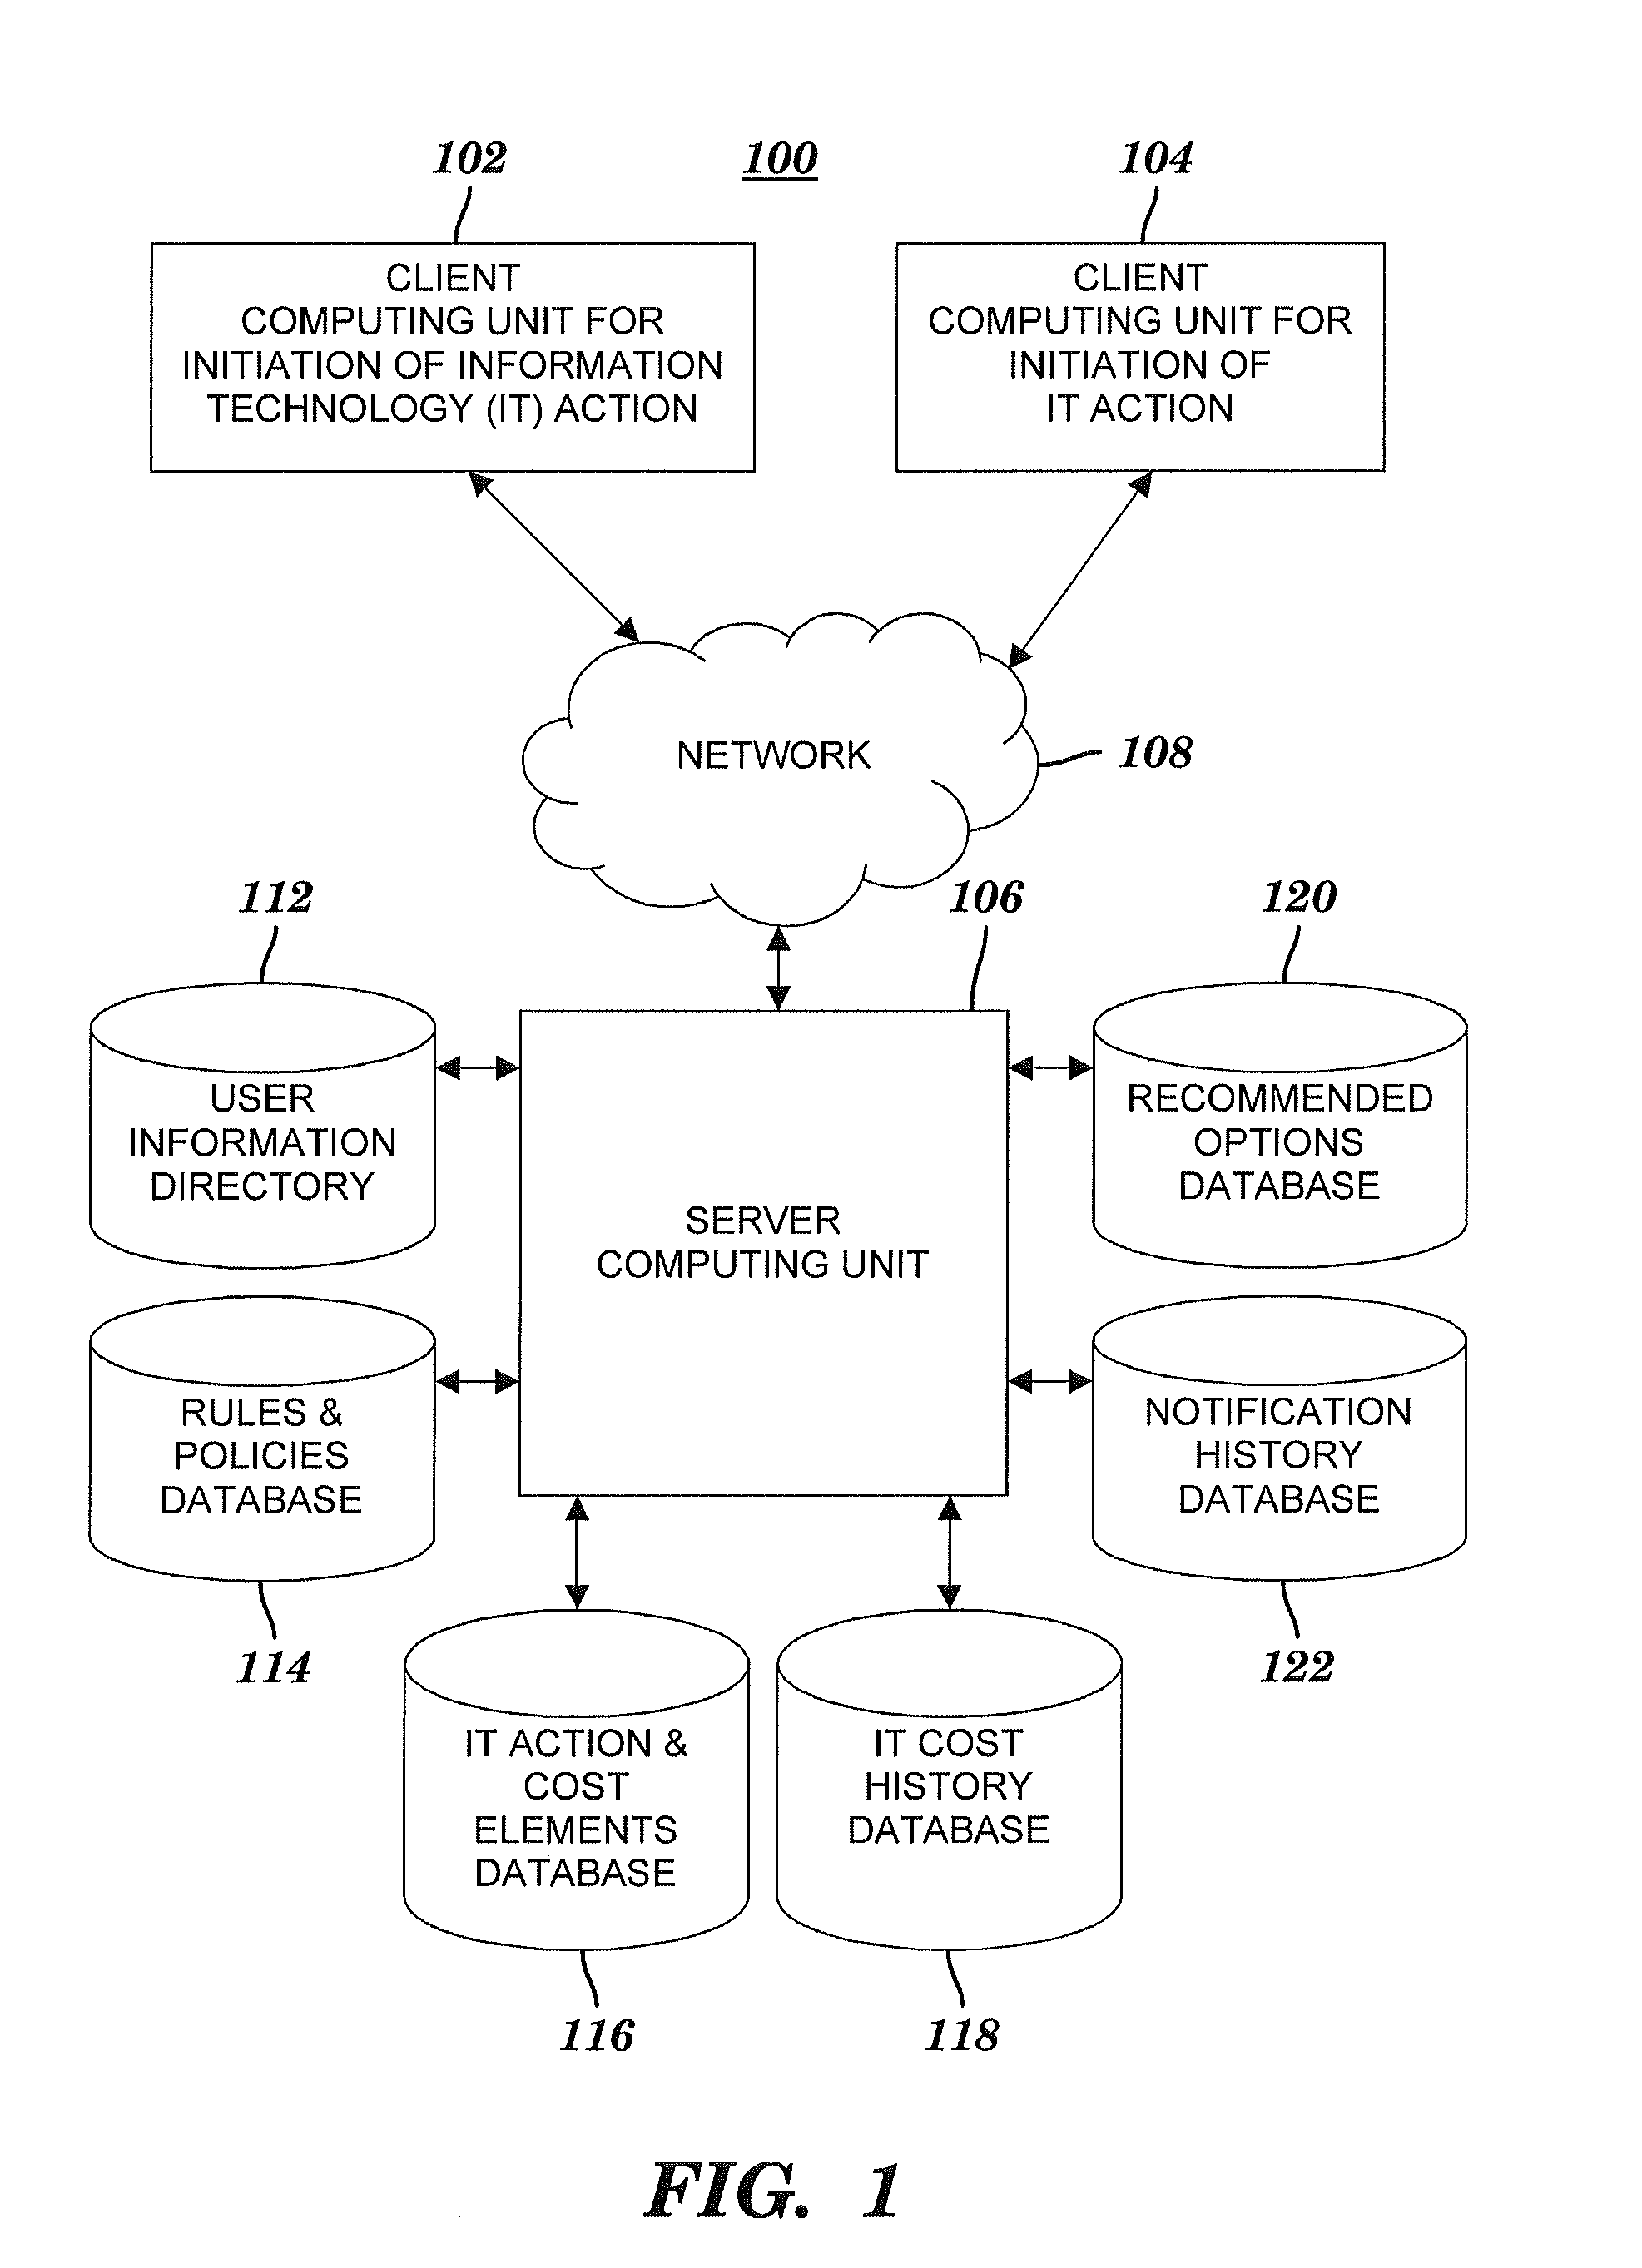 System and method for identifying and reducing costs of information technology actions in real time